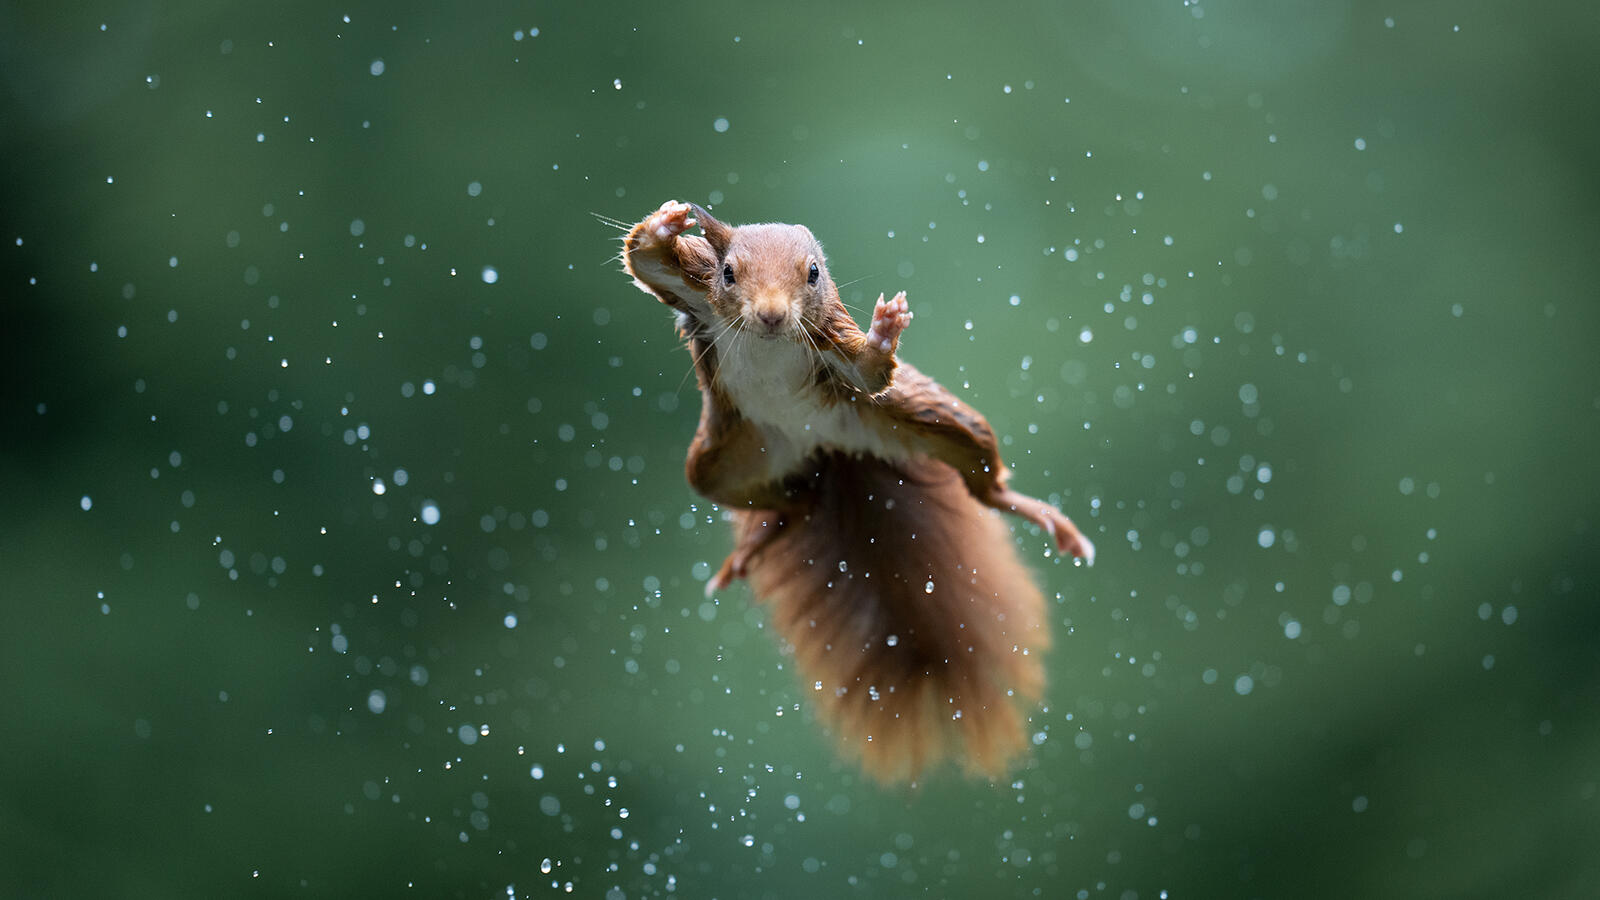 Free photo Cool squirrel in flight